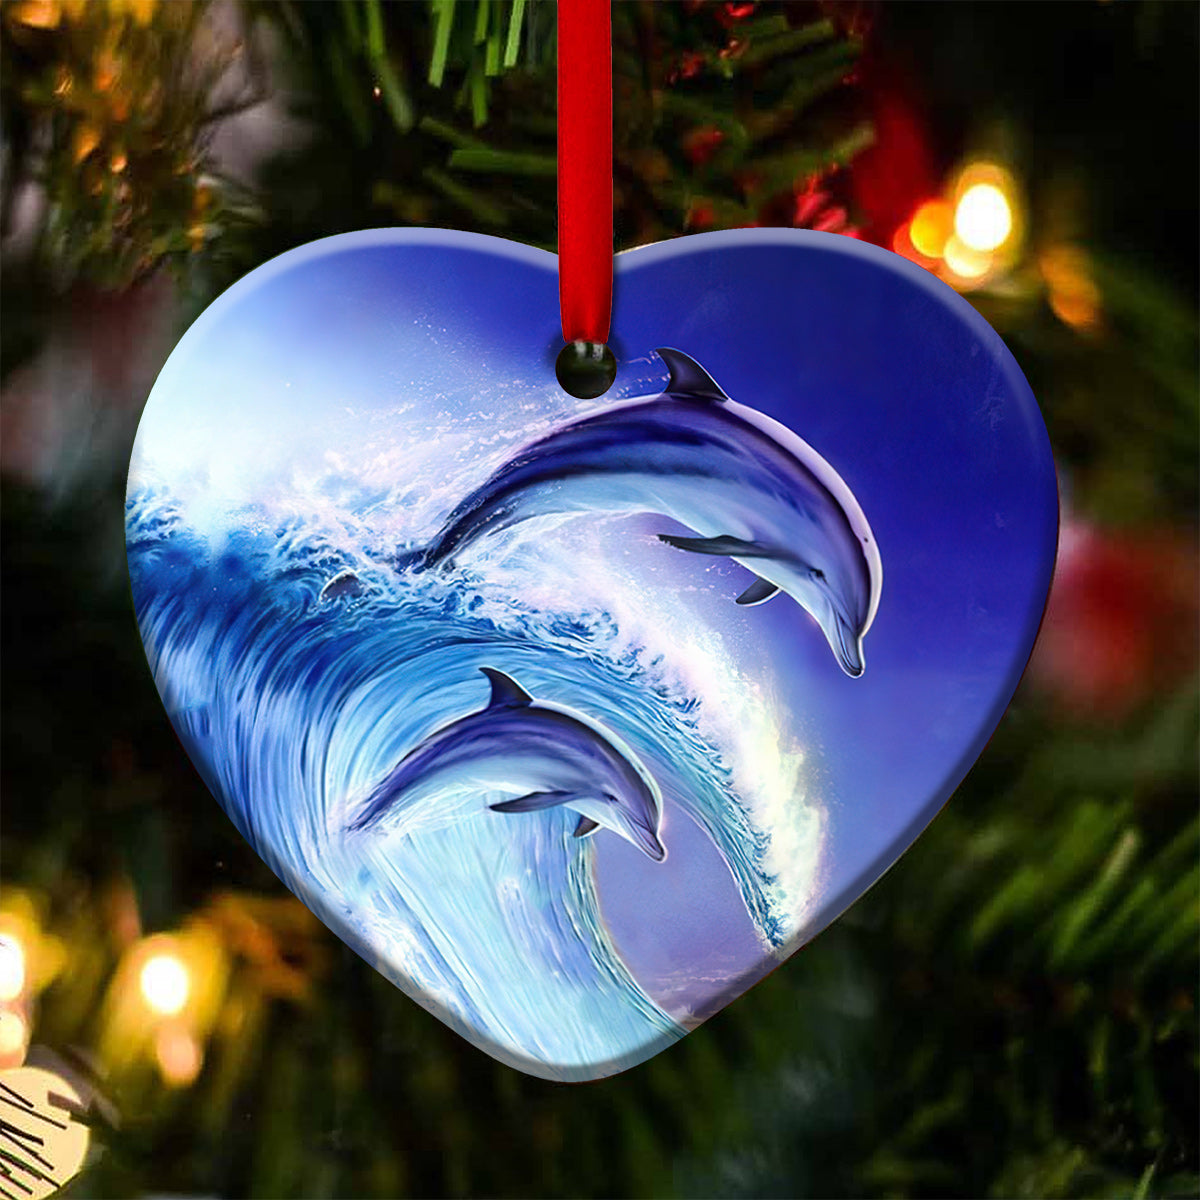 Dolphin Riding Wave Heart Ceramic Ornament - Christmas Ornament - Christmas Gift